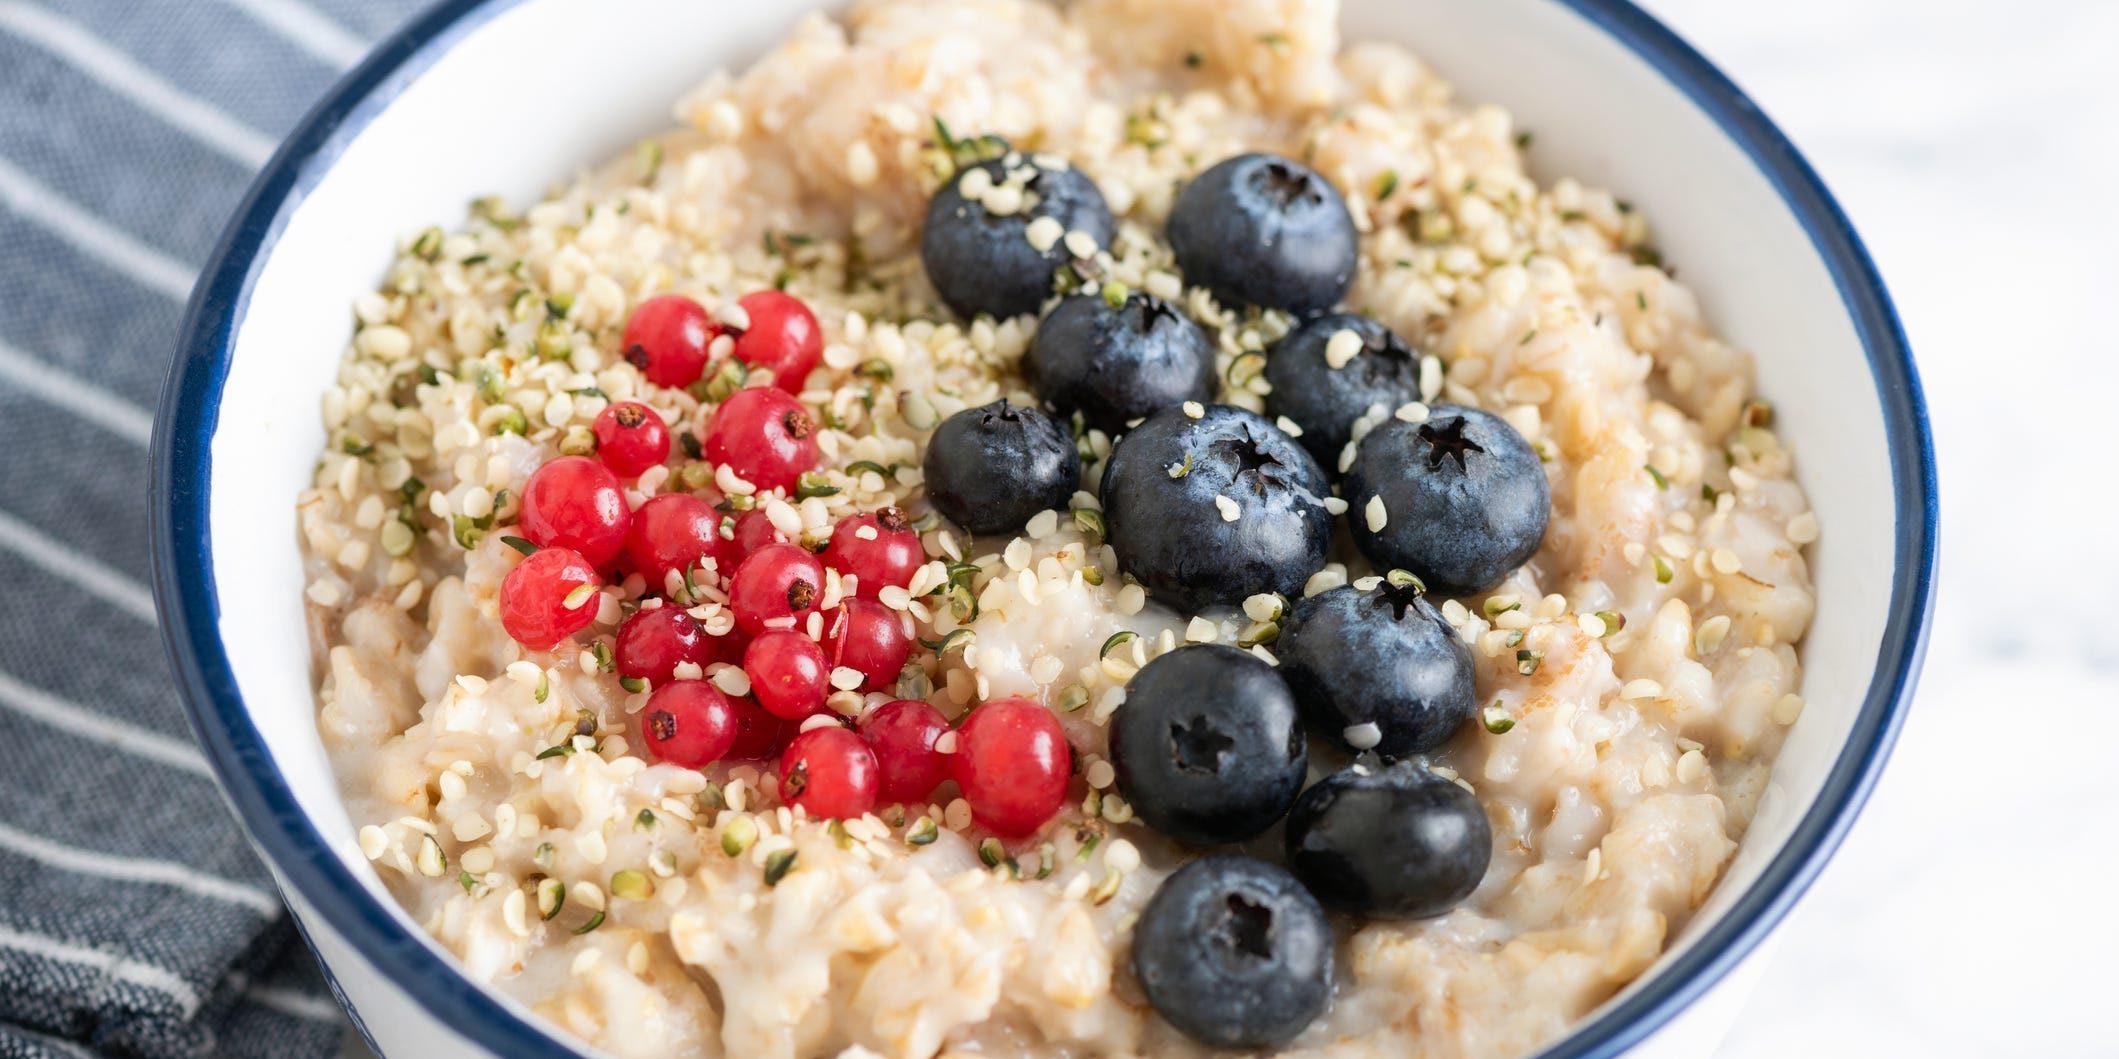 Oatmeal in a bowl topped with blue and red berries.